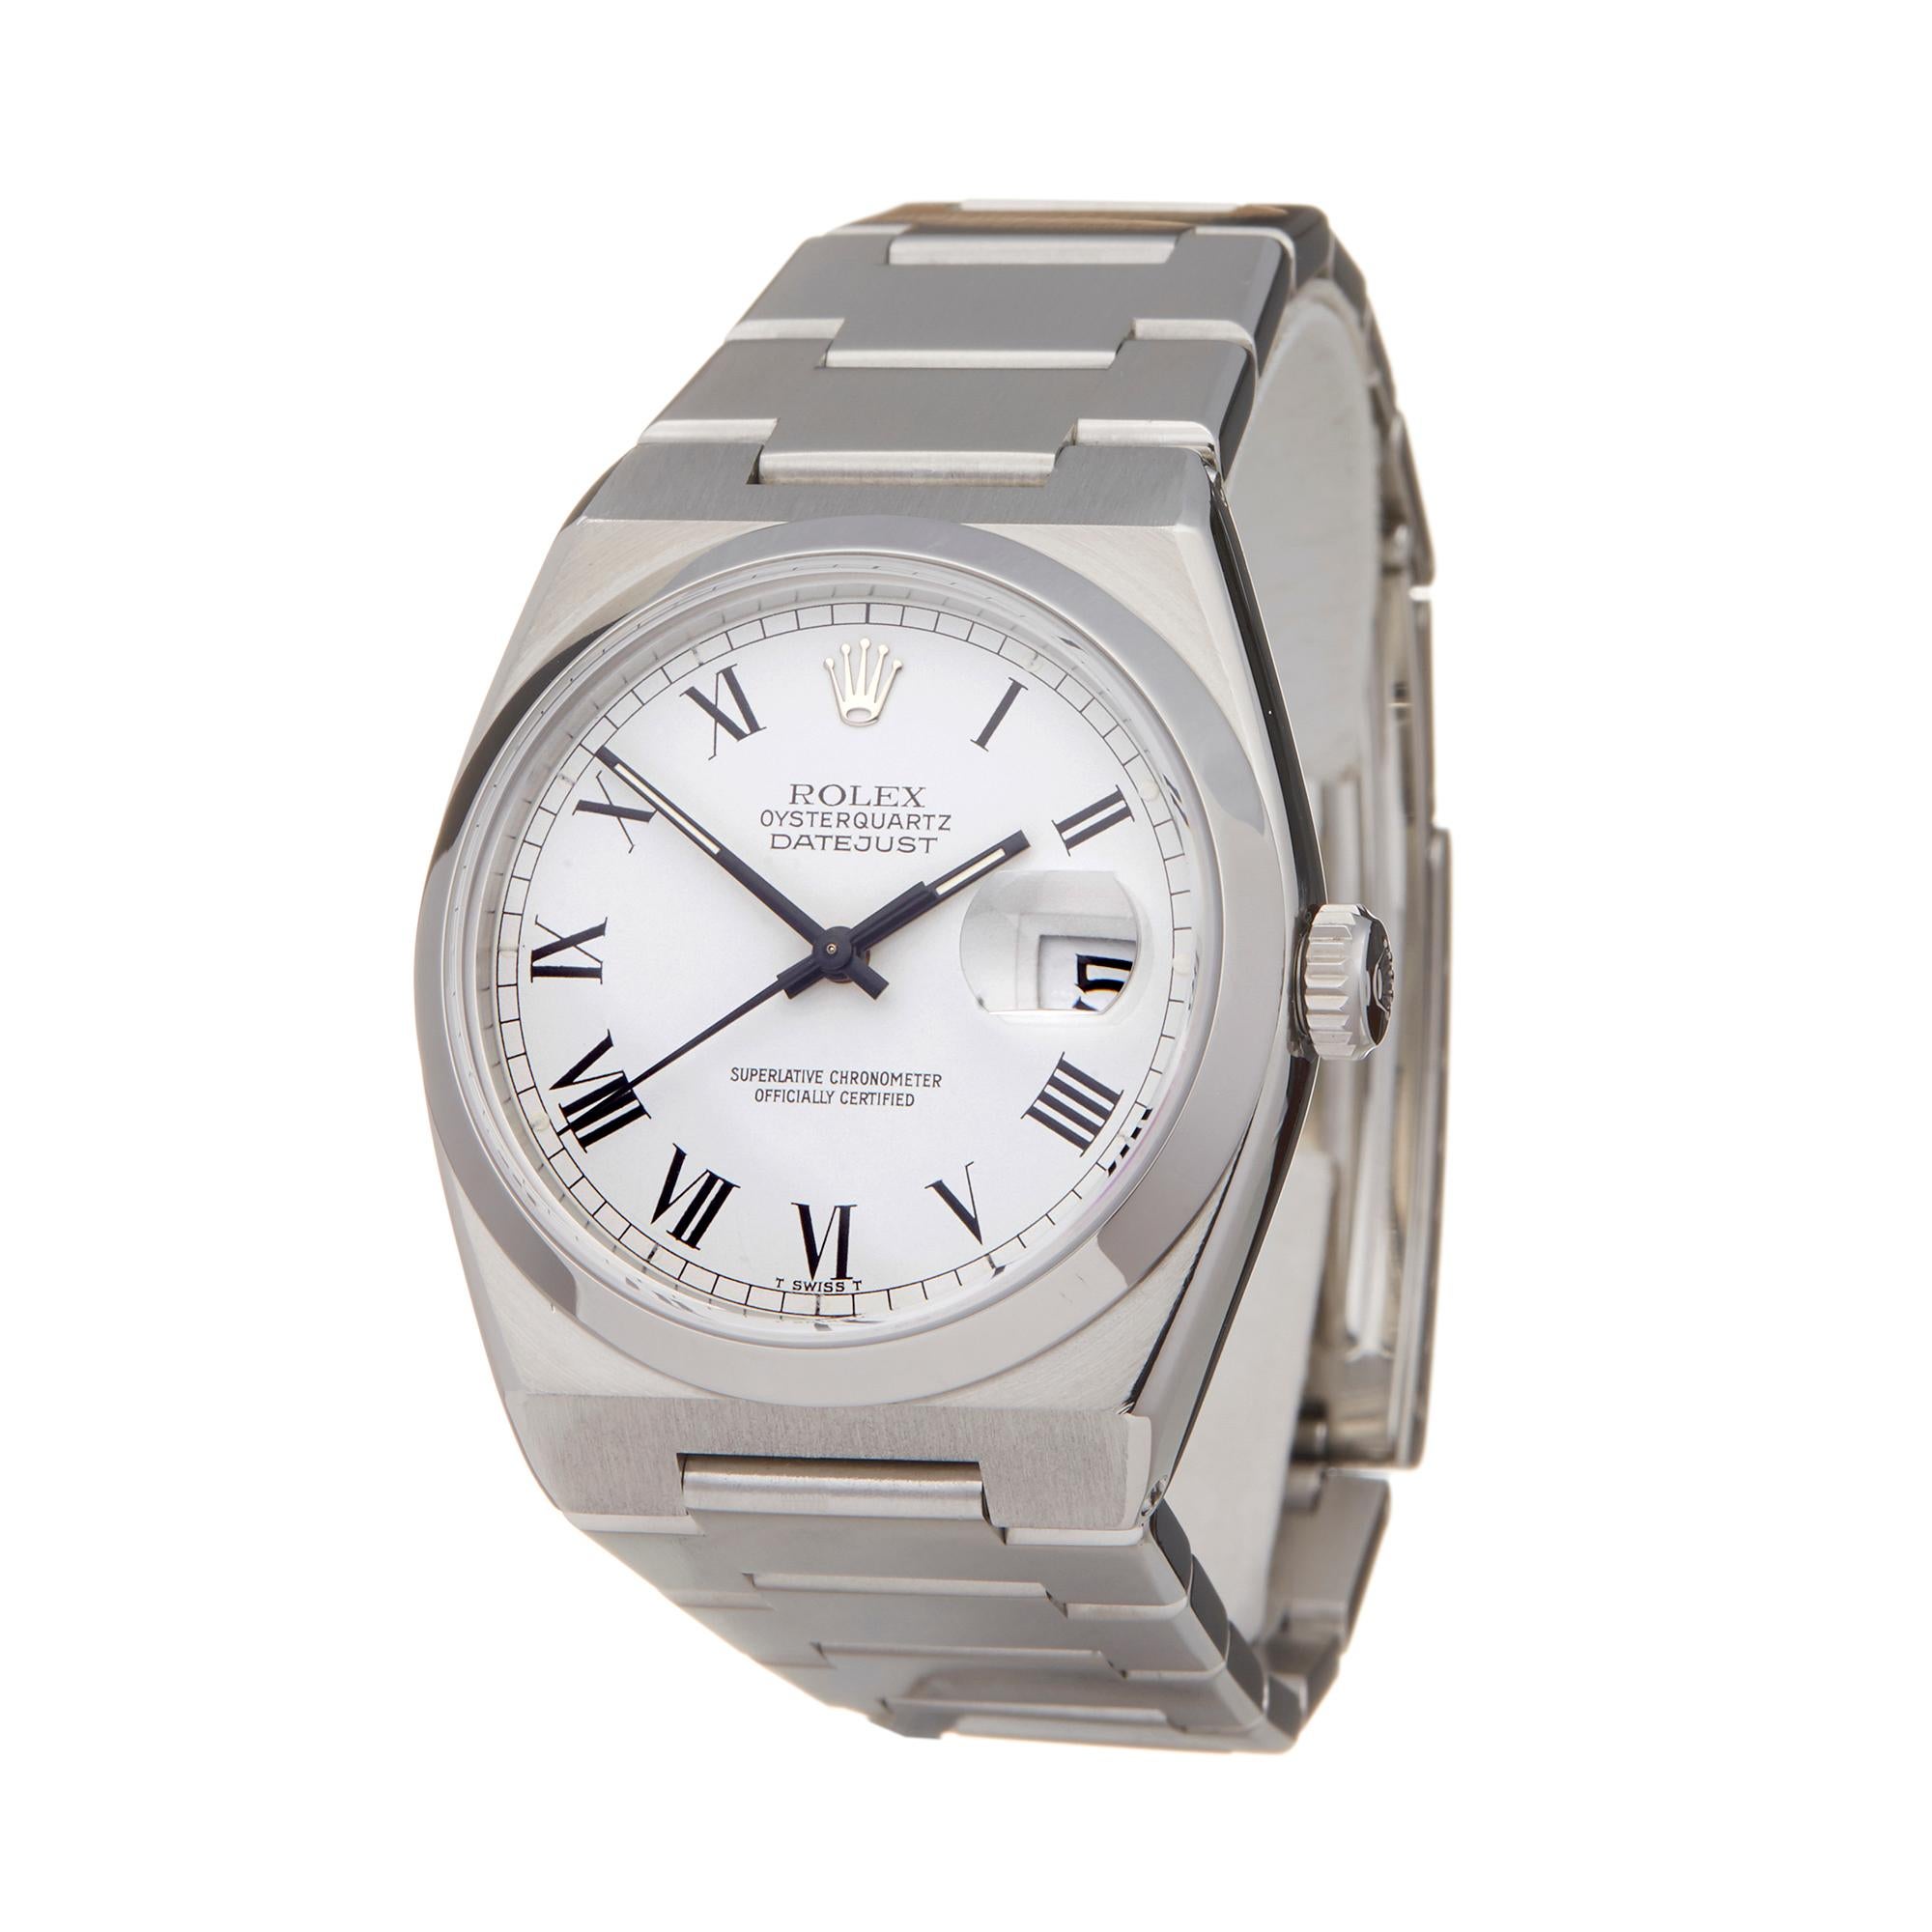 Reference: COM2162
Manufacturer: Rolex
Model: Oyster Quartz
Model Reference: 17000
Age: 17th January 1981
Gender: Men's
Box and Papers: Box Manuals and Guarantee
Dial: White Roman
Glass: Sapphire Crystal
Movement: Quartz
Water Resistance: To